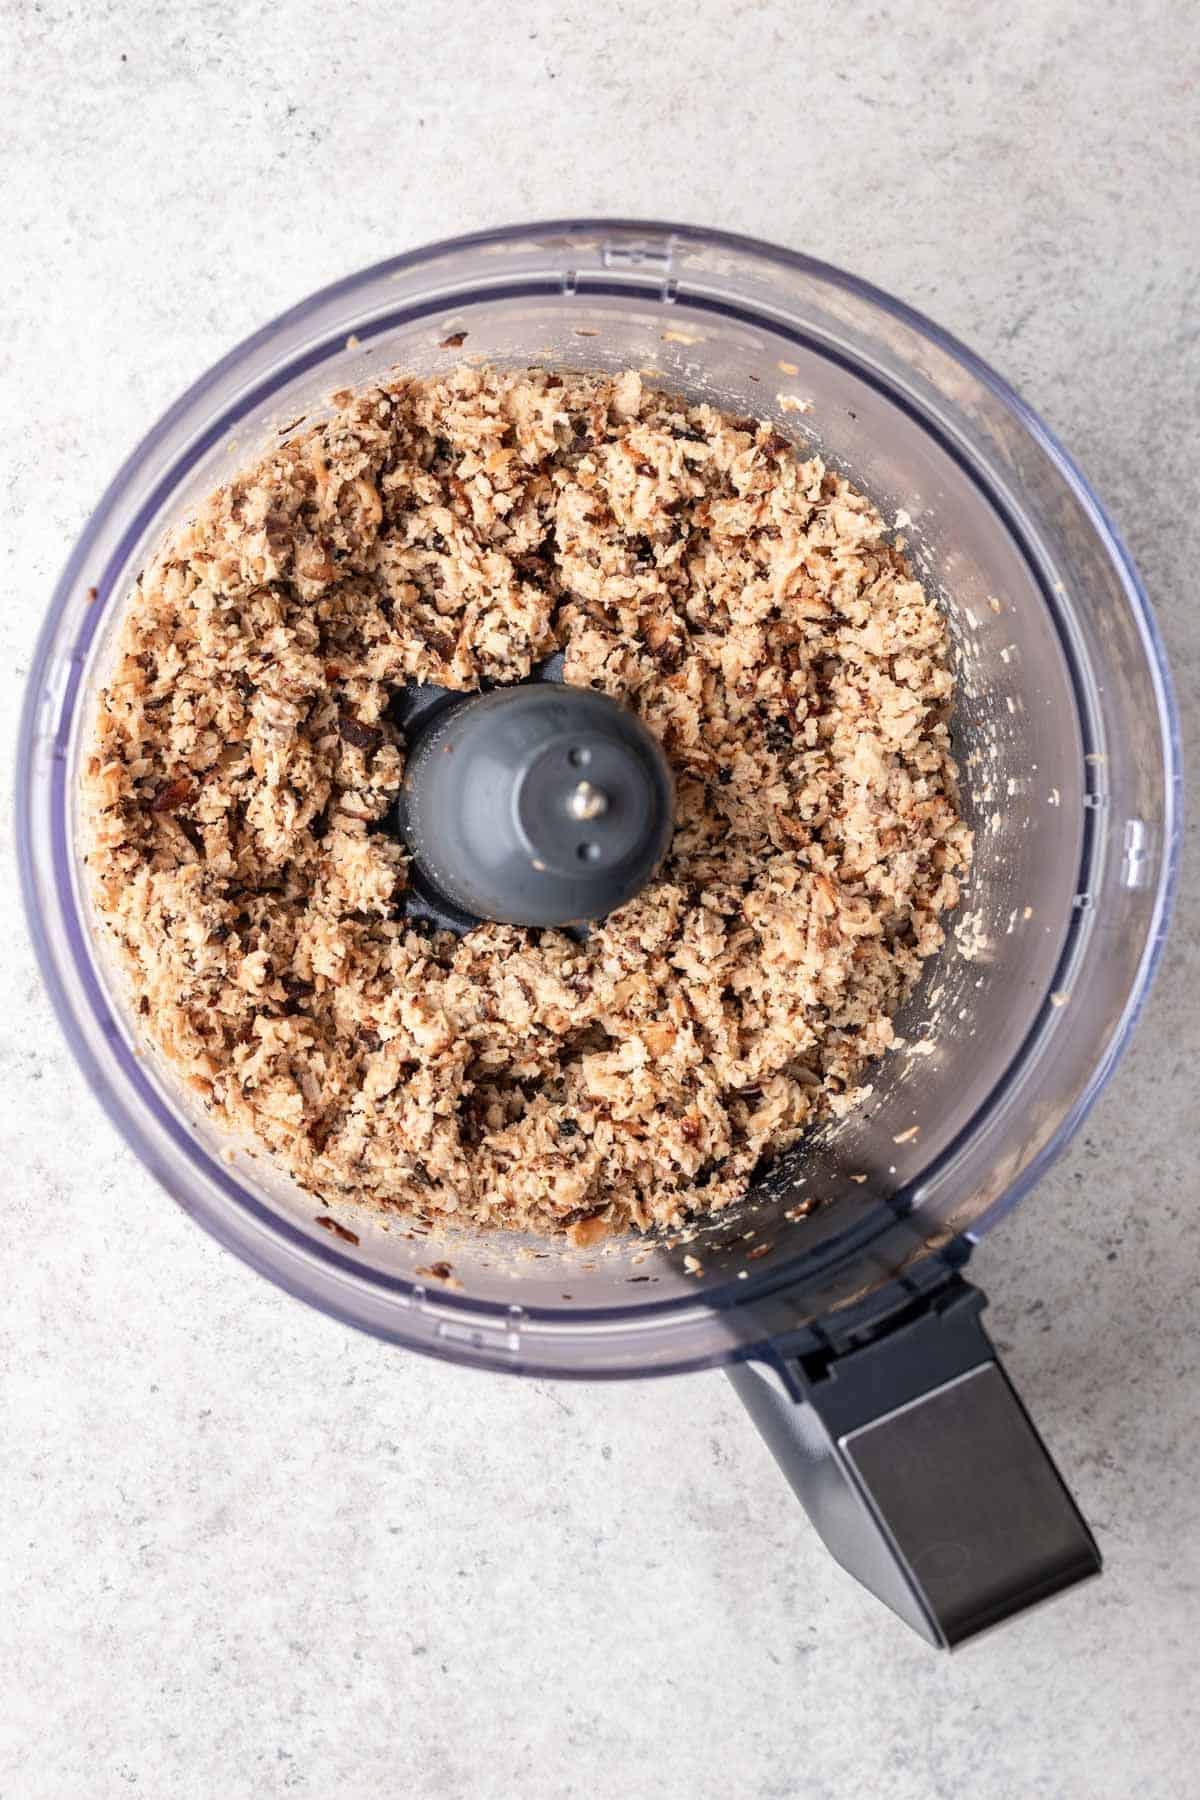 Ground beef ingredients pulsed together in a food processor.